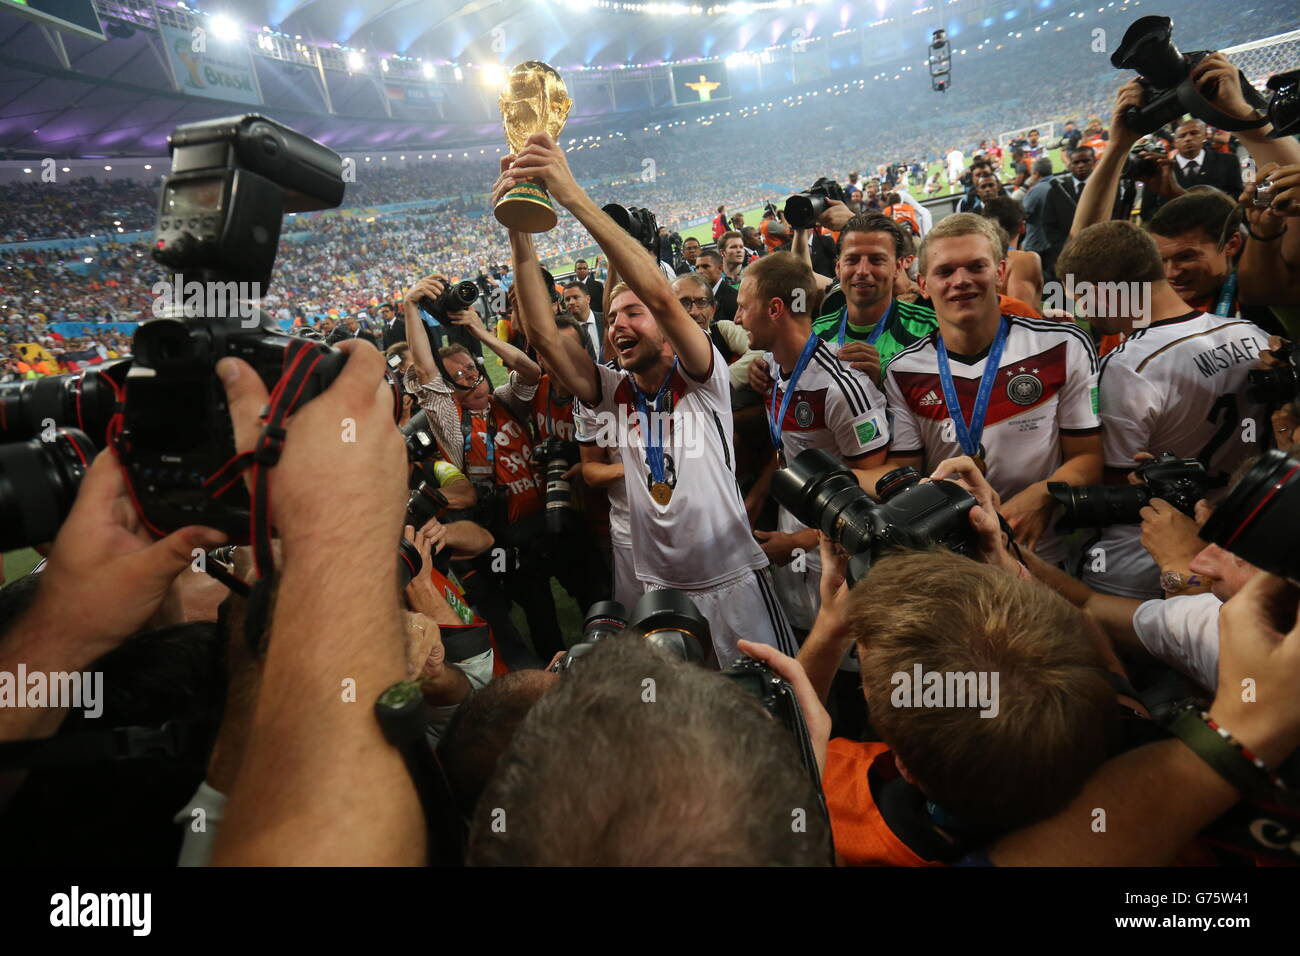 Soccer - FIFA World Cup 2014 - Final - Germany v Argentina - Estadio do Maracana. Germany's Christoph Kramer is mobbed by photographers after the FIFA World Cup Final at the Estadio do Maracana, Rio de Janerio, Brazil. Stock Photo